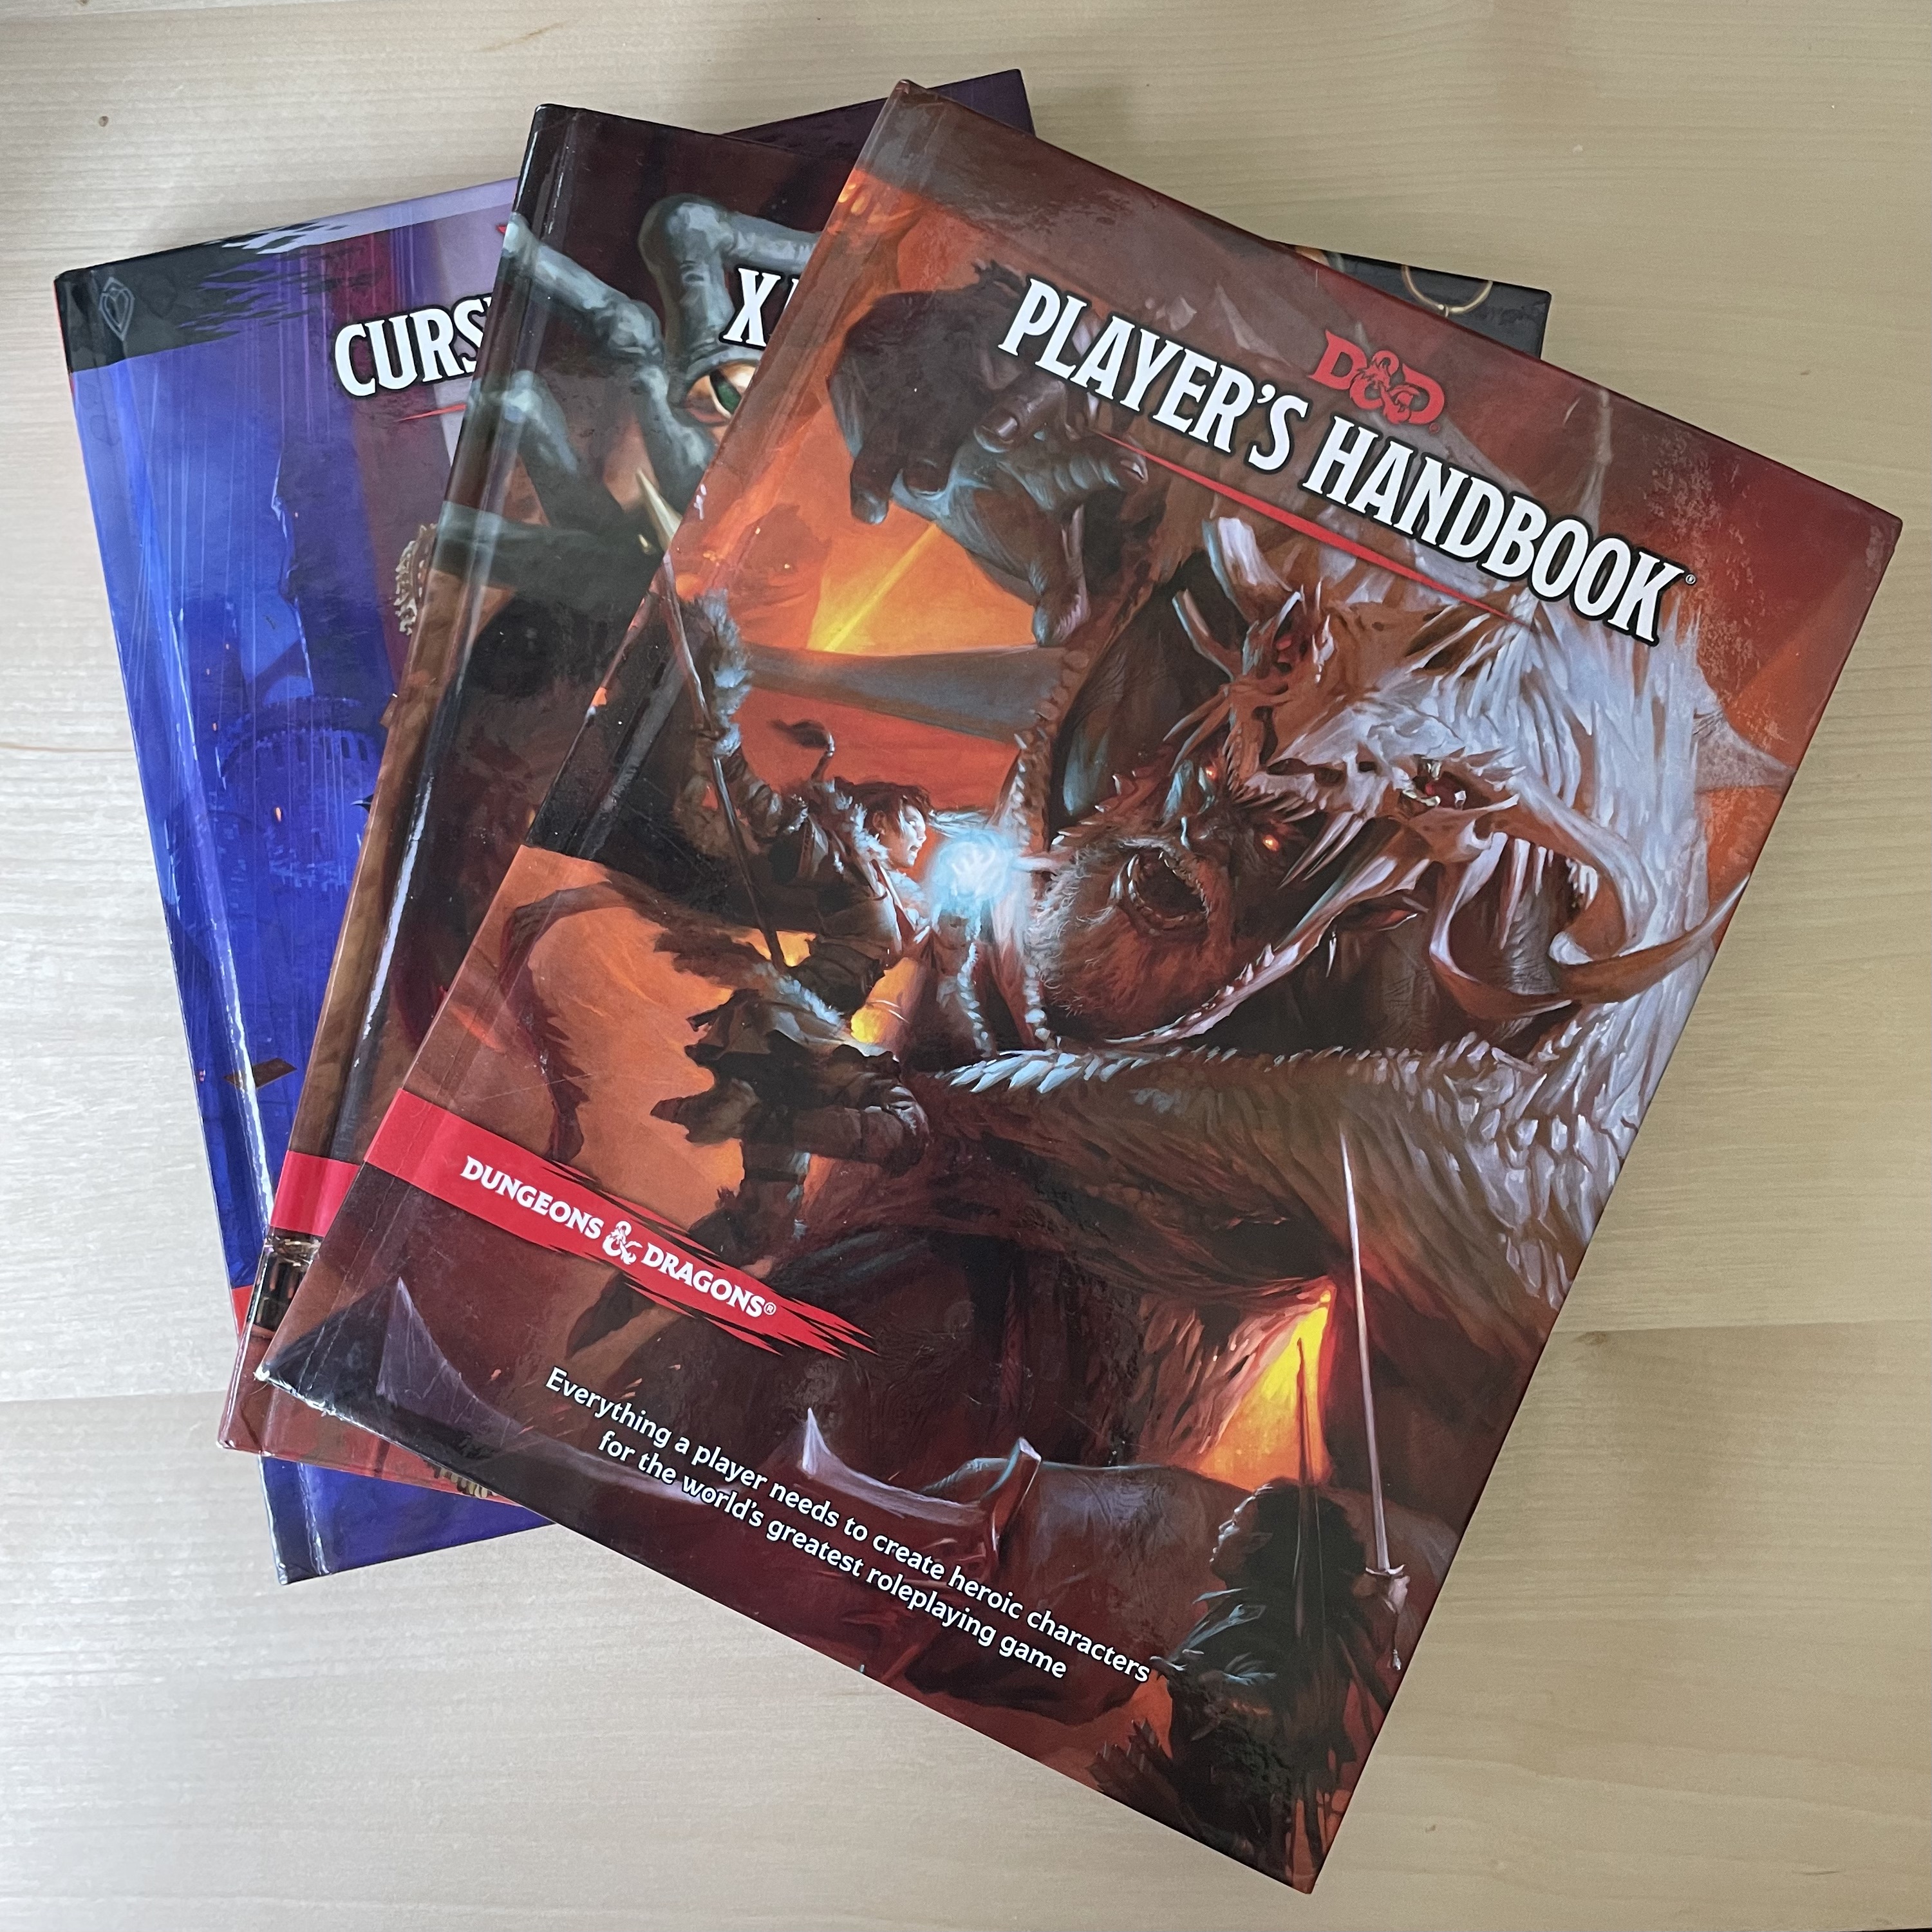 A stack of Dungeons and Dragons books